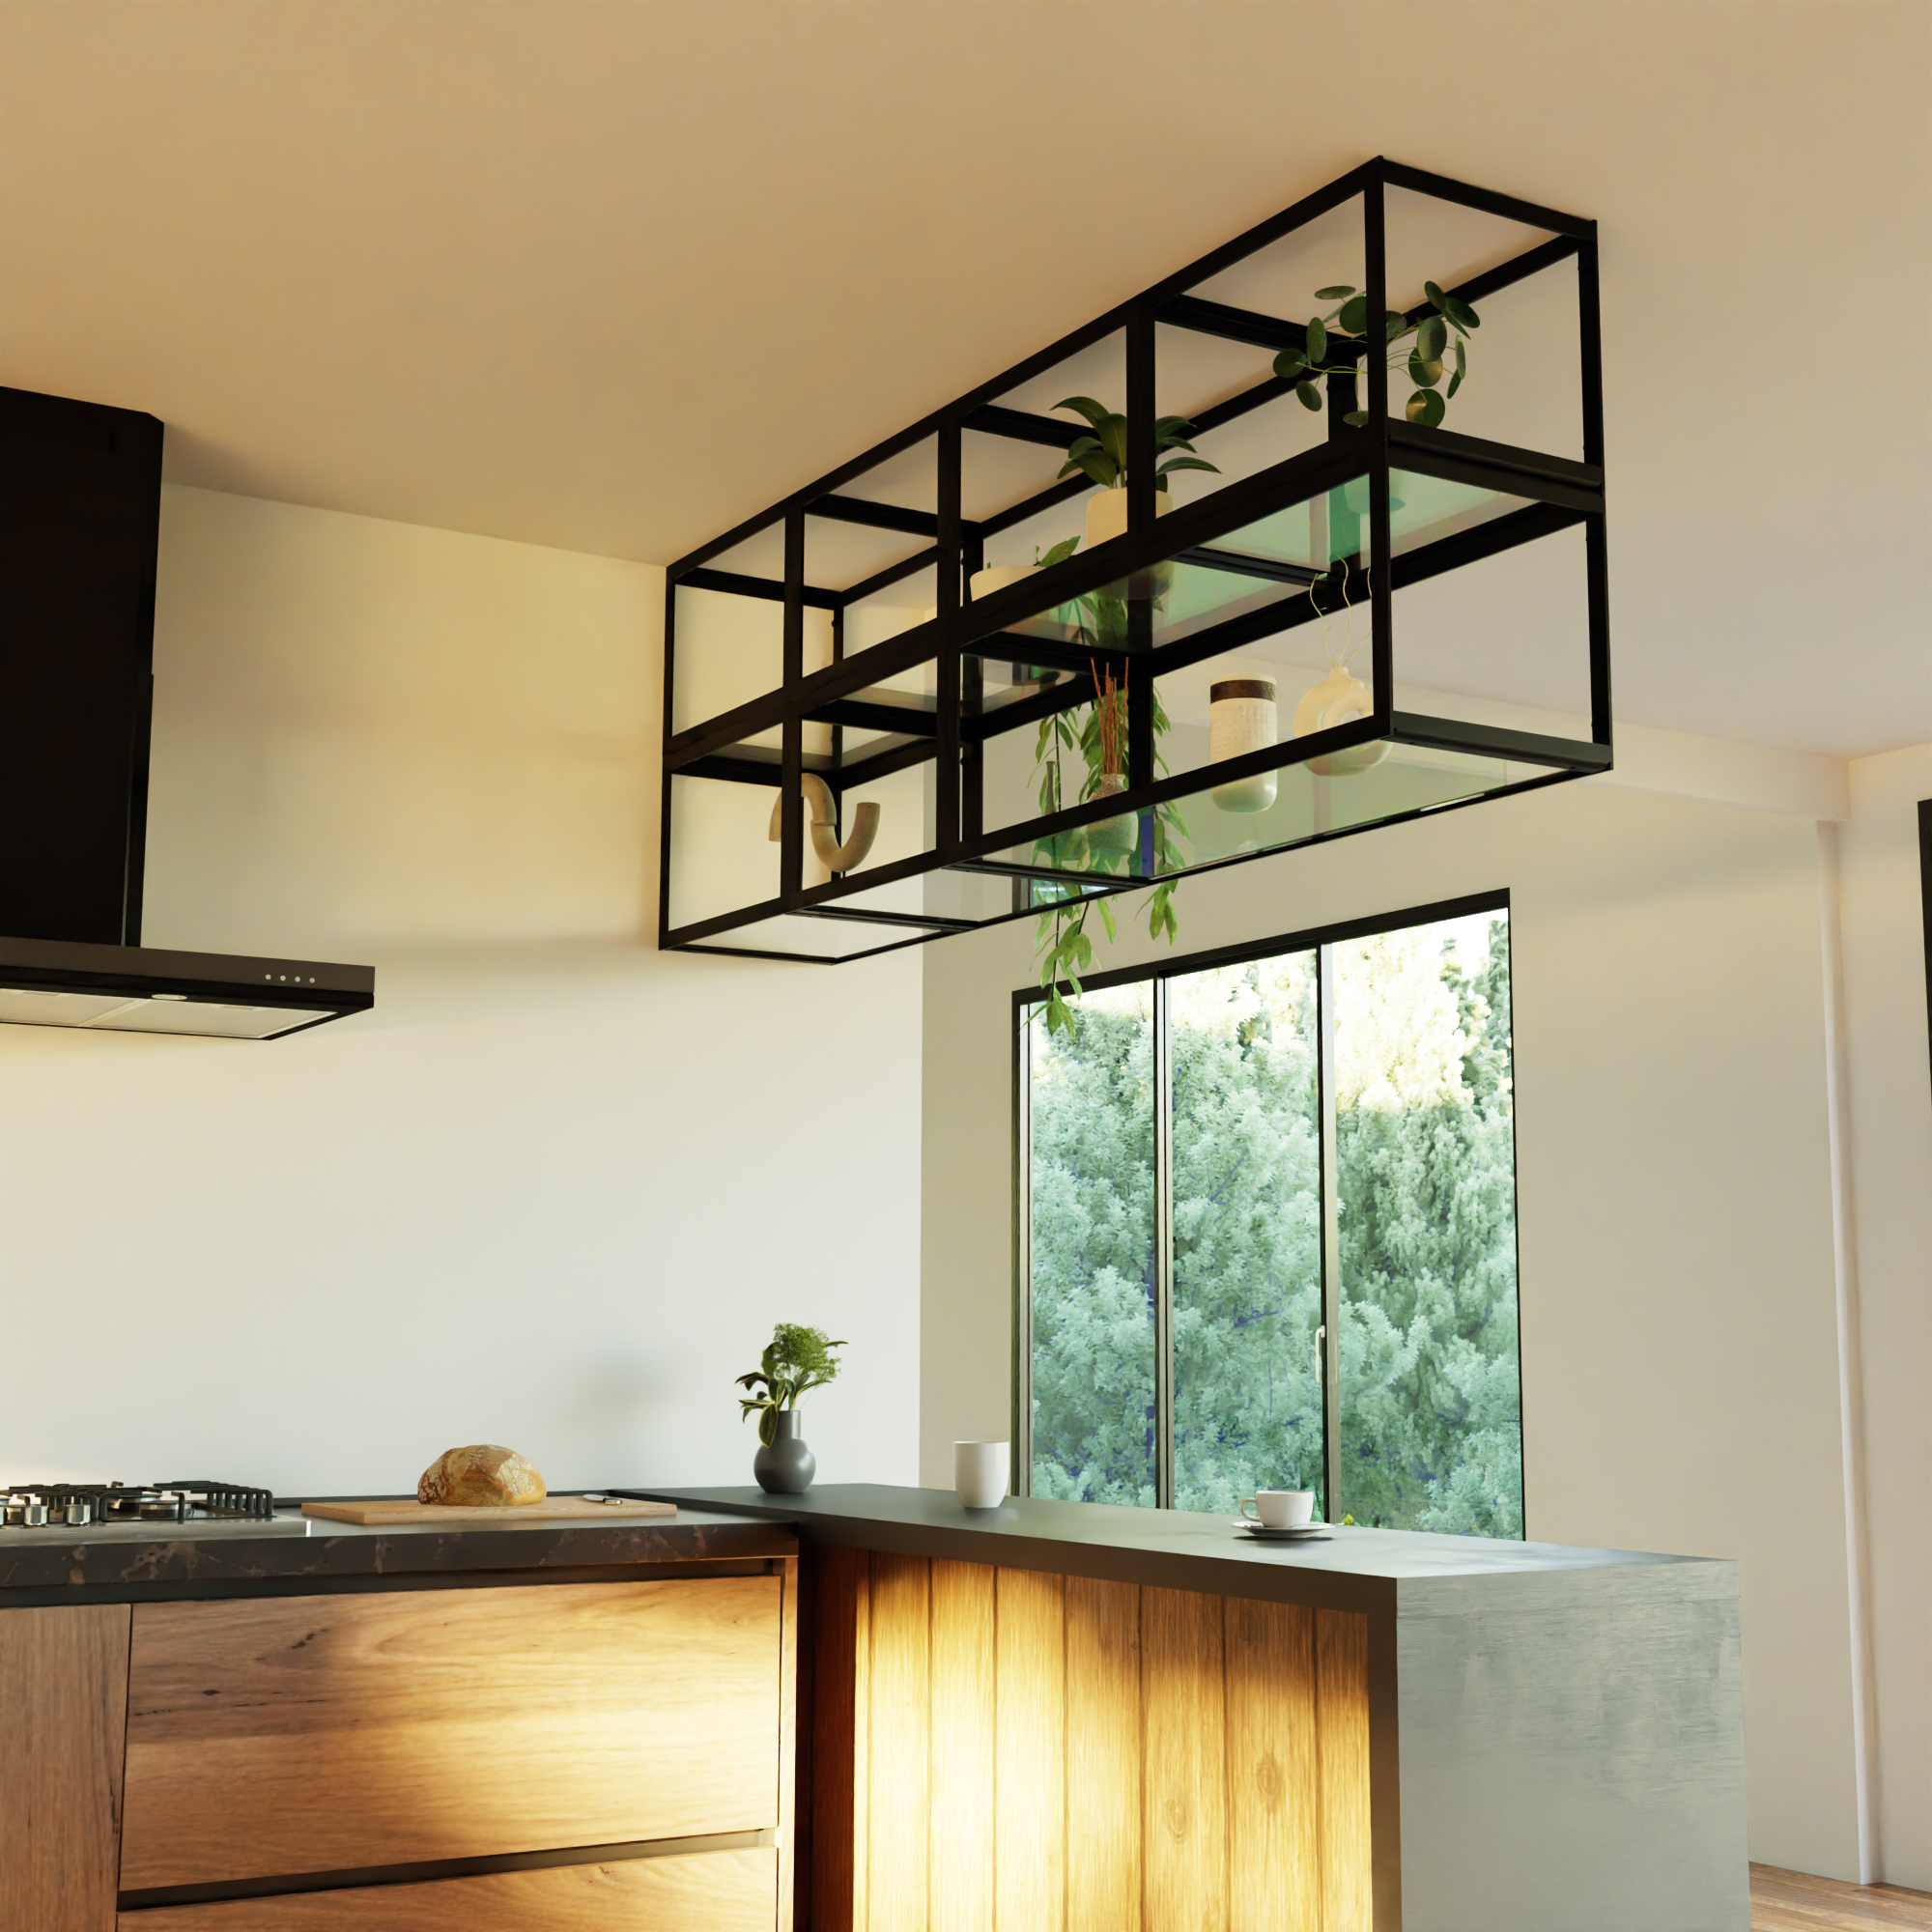 Suspended Cabinet Design - Kitchen Cube Cabinet by Federal Brace